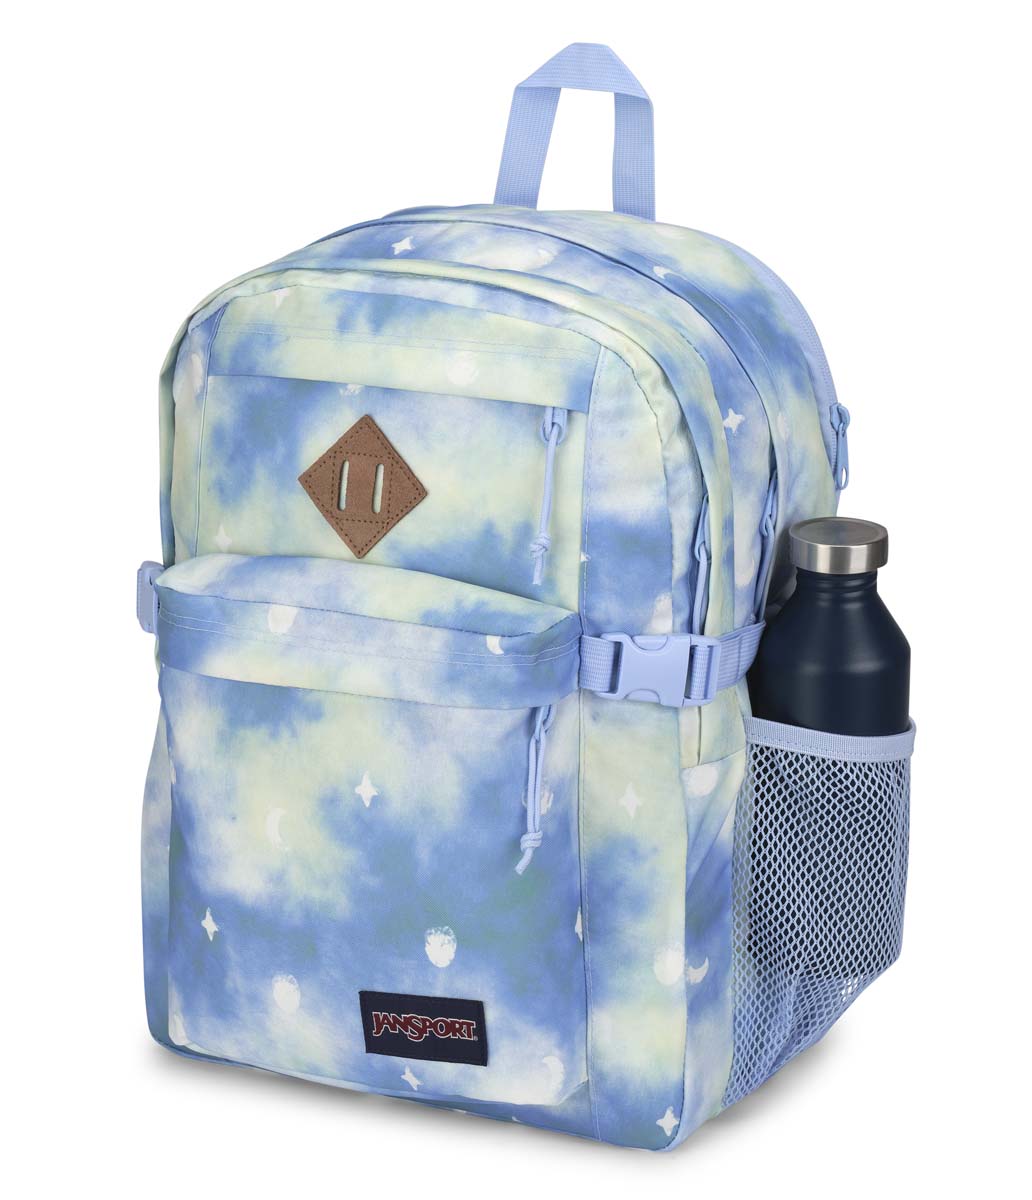 JanSport Main Campus Backpack - Moonscape